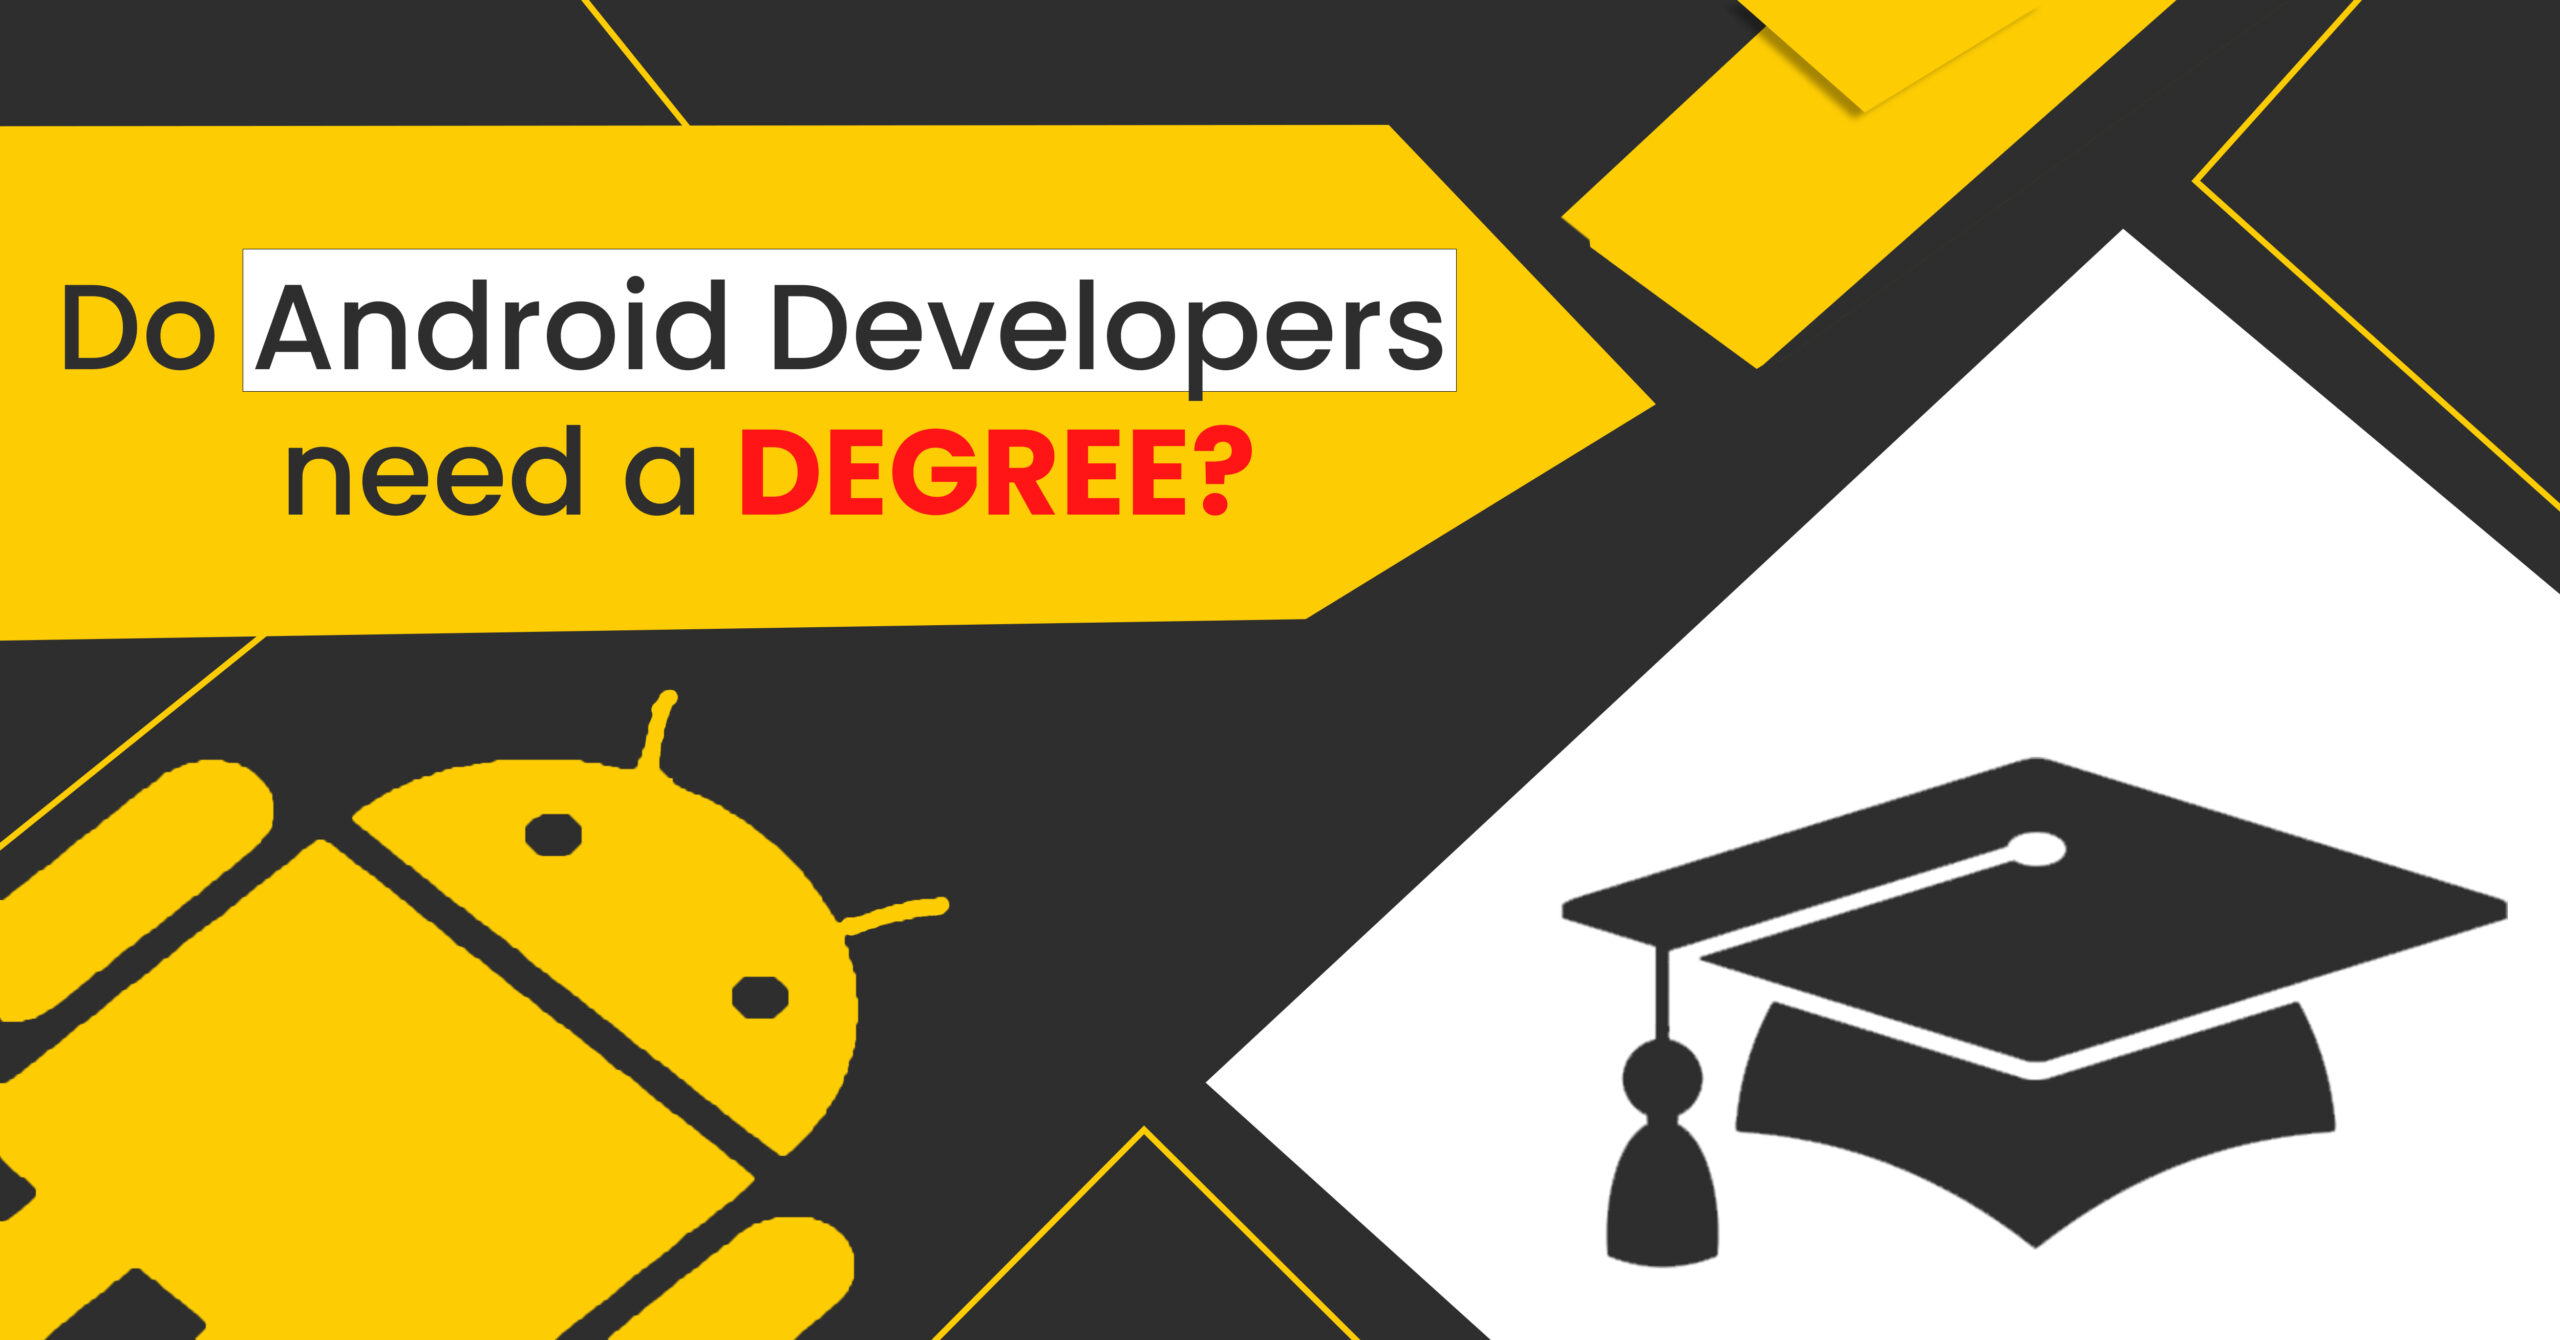 Android Developers need a degree